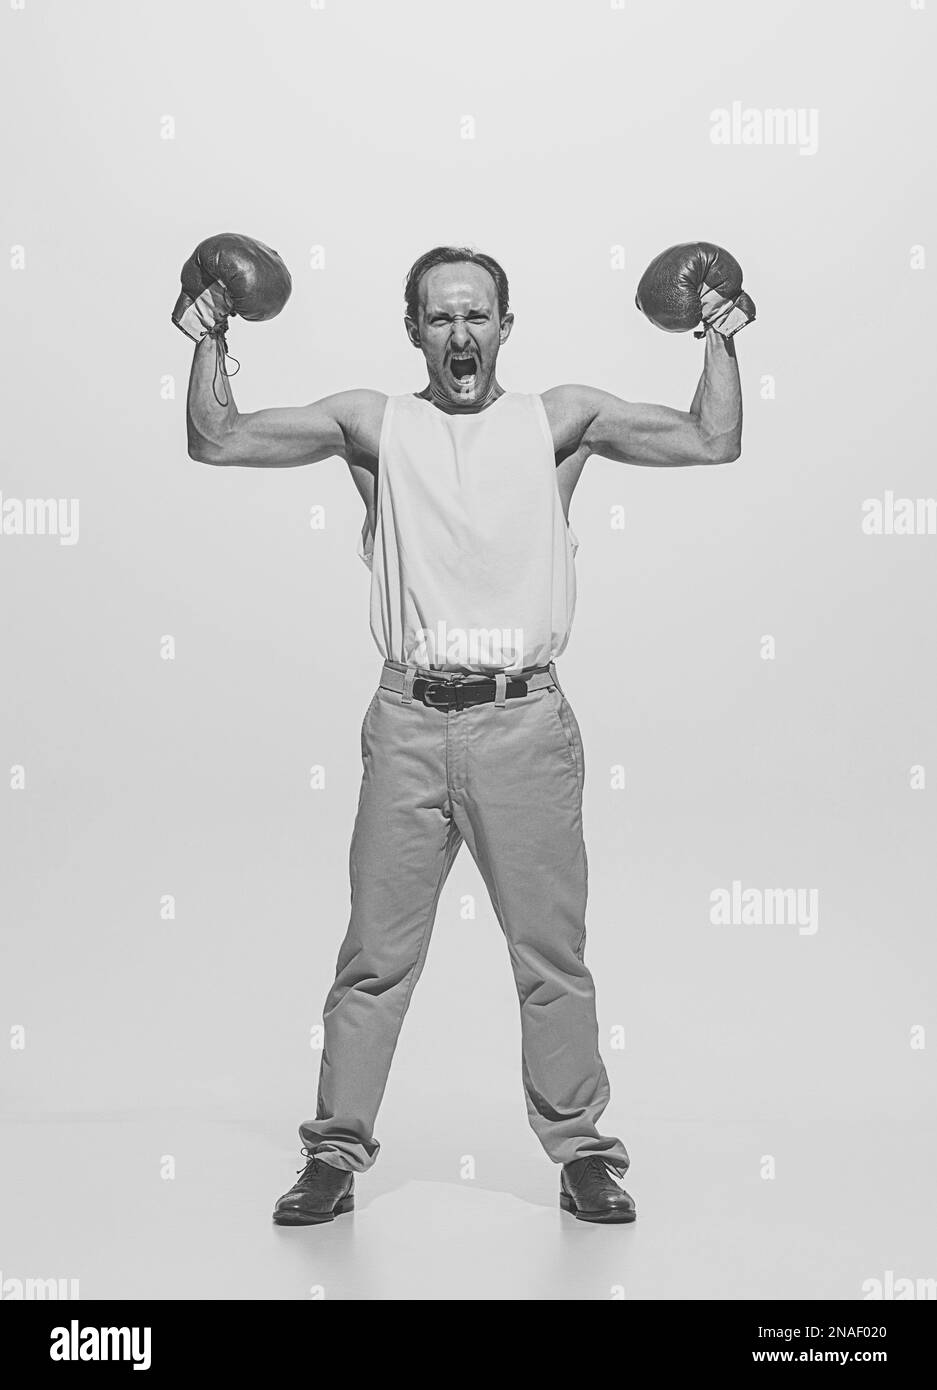 https://c8.alamy.com/comp/2NAF020/portrait-of-muscular-retro-man-in-vintage-clothes-showing-muscles-in-boxing-gloves-posing-black-and-white-photography-2NAF020.jpg